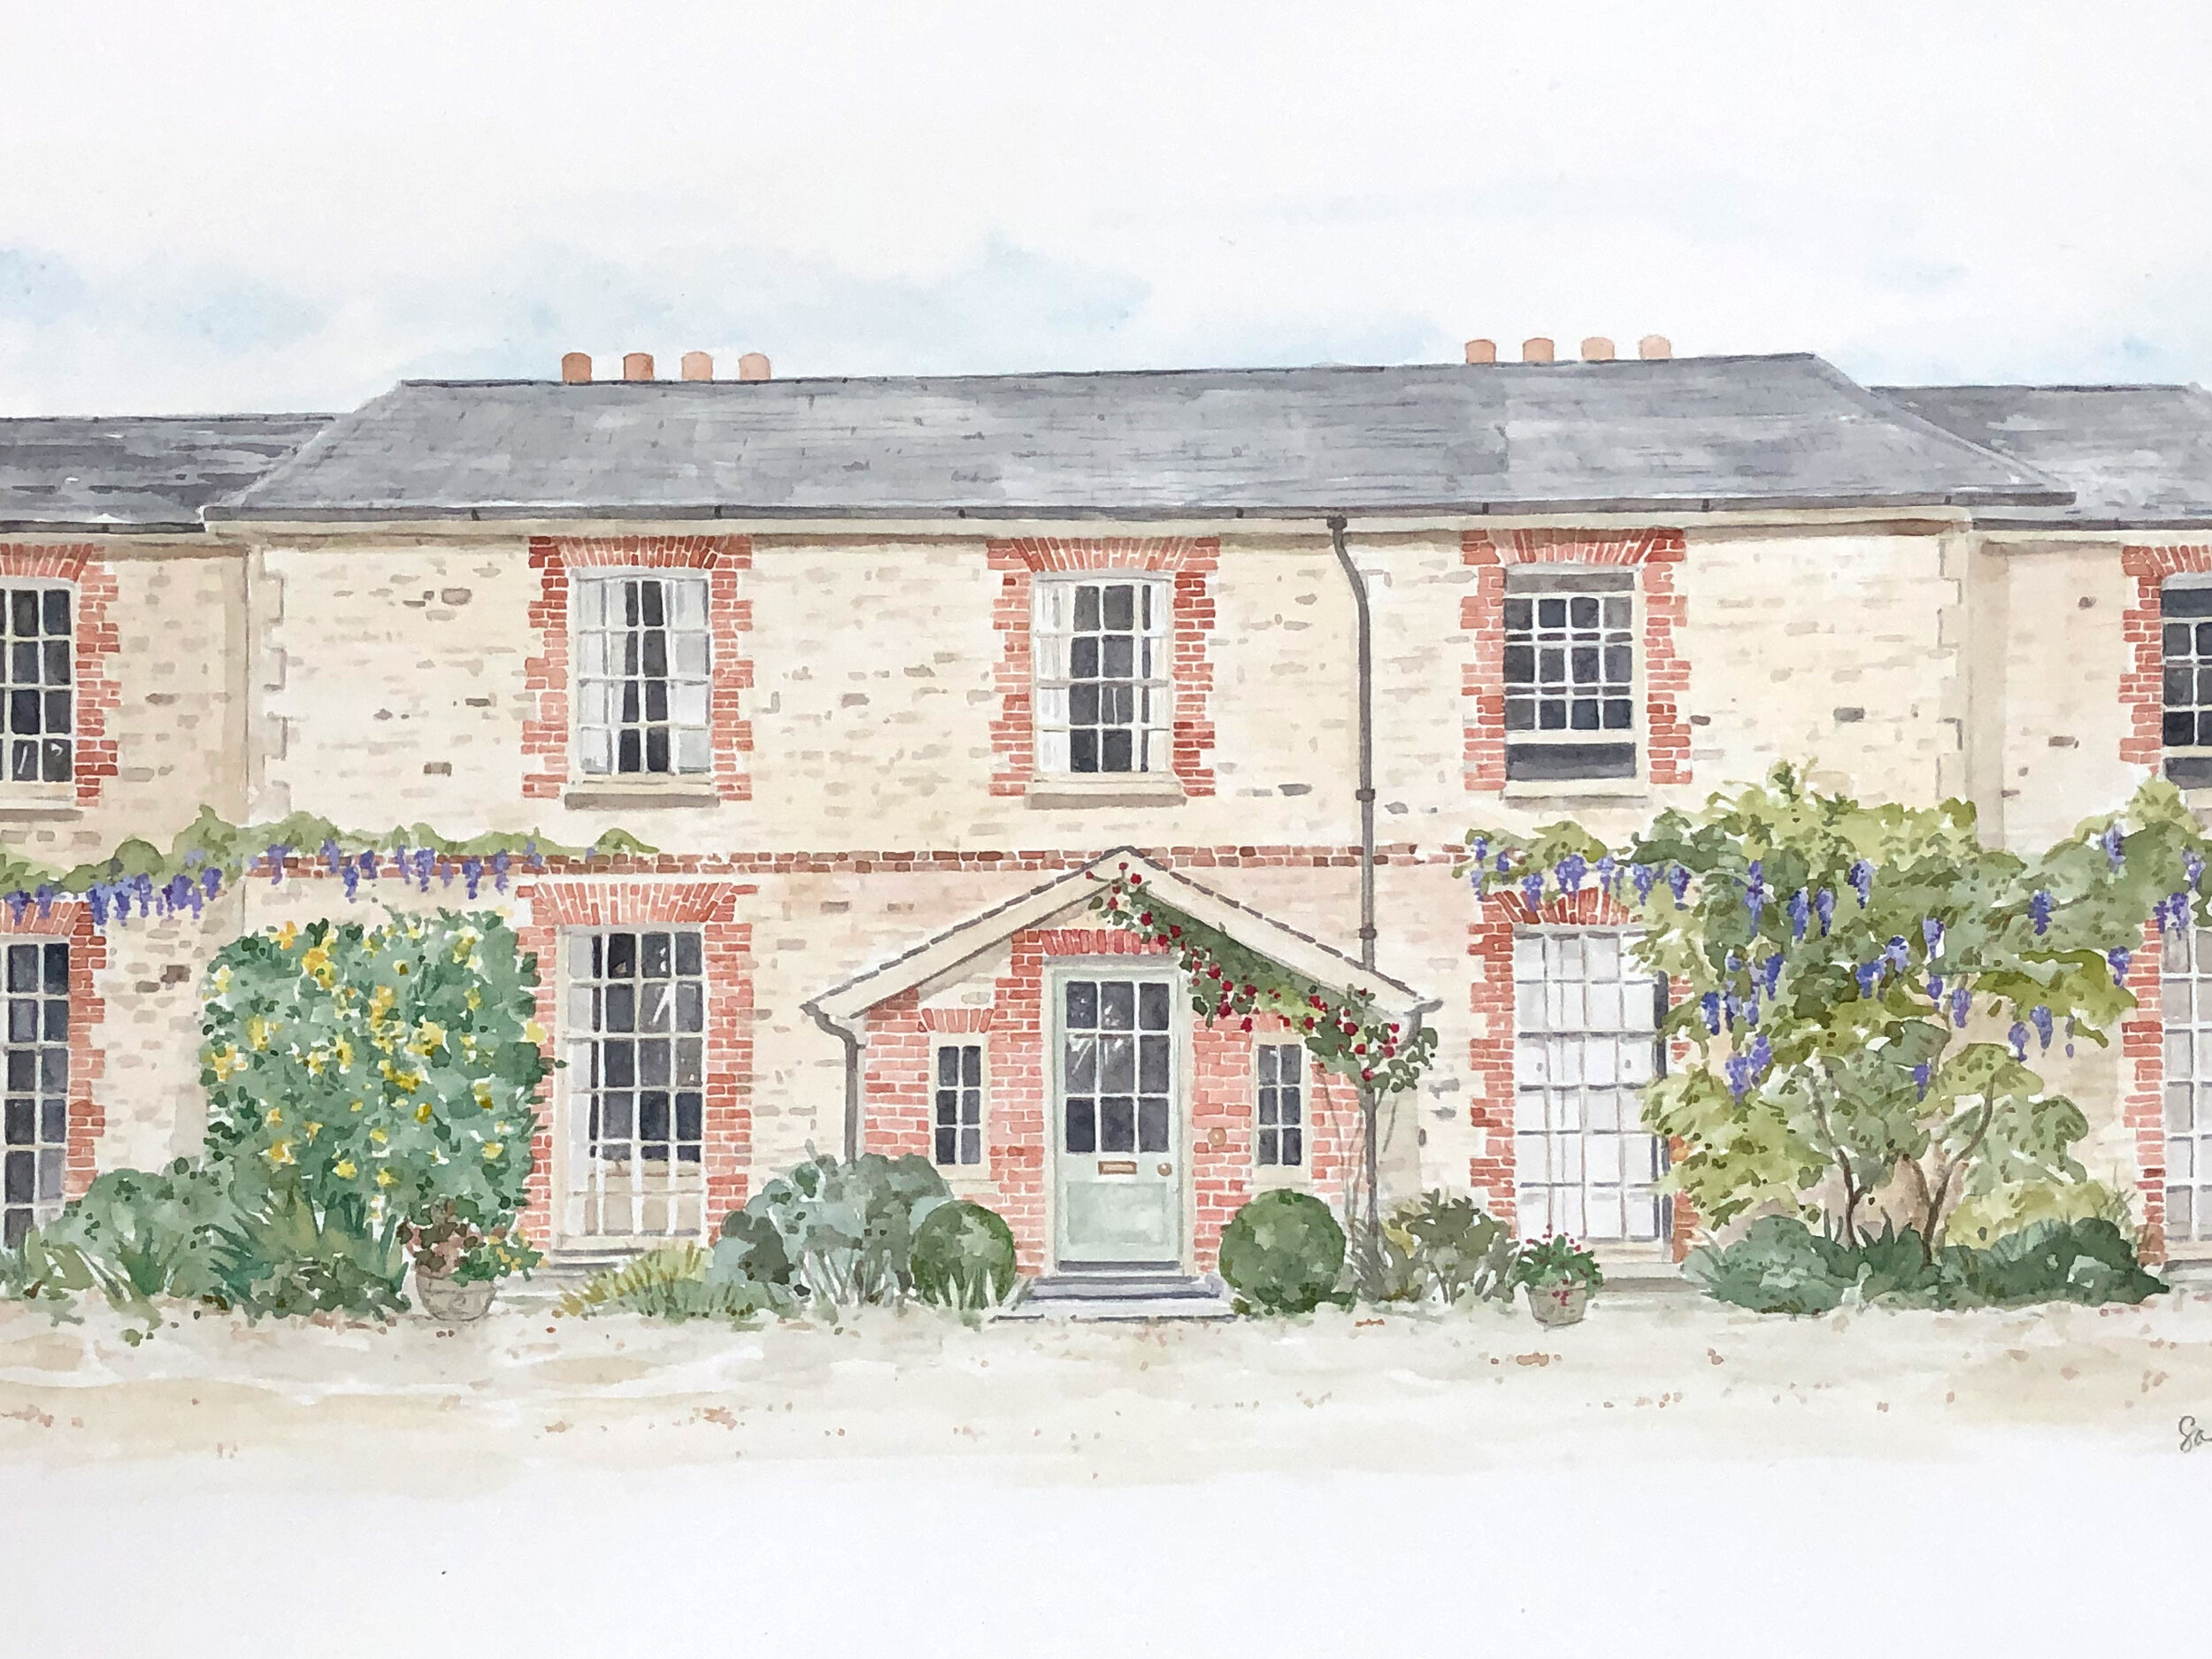 Country House, Oxfordshire. Watercolour